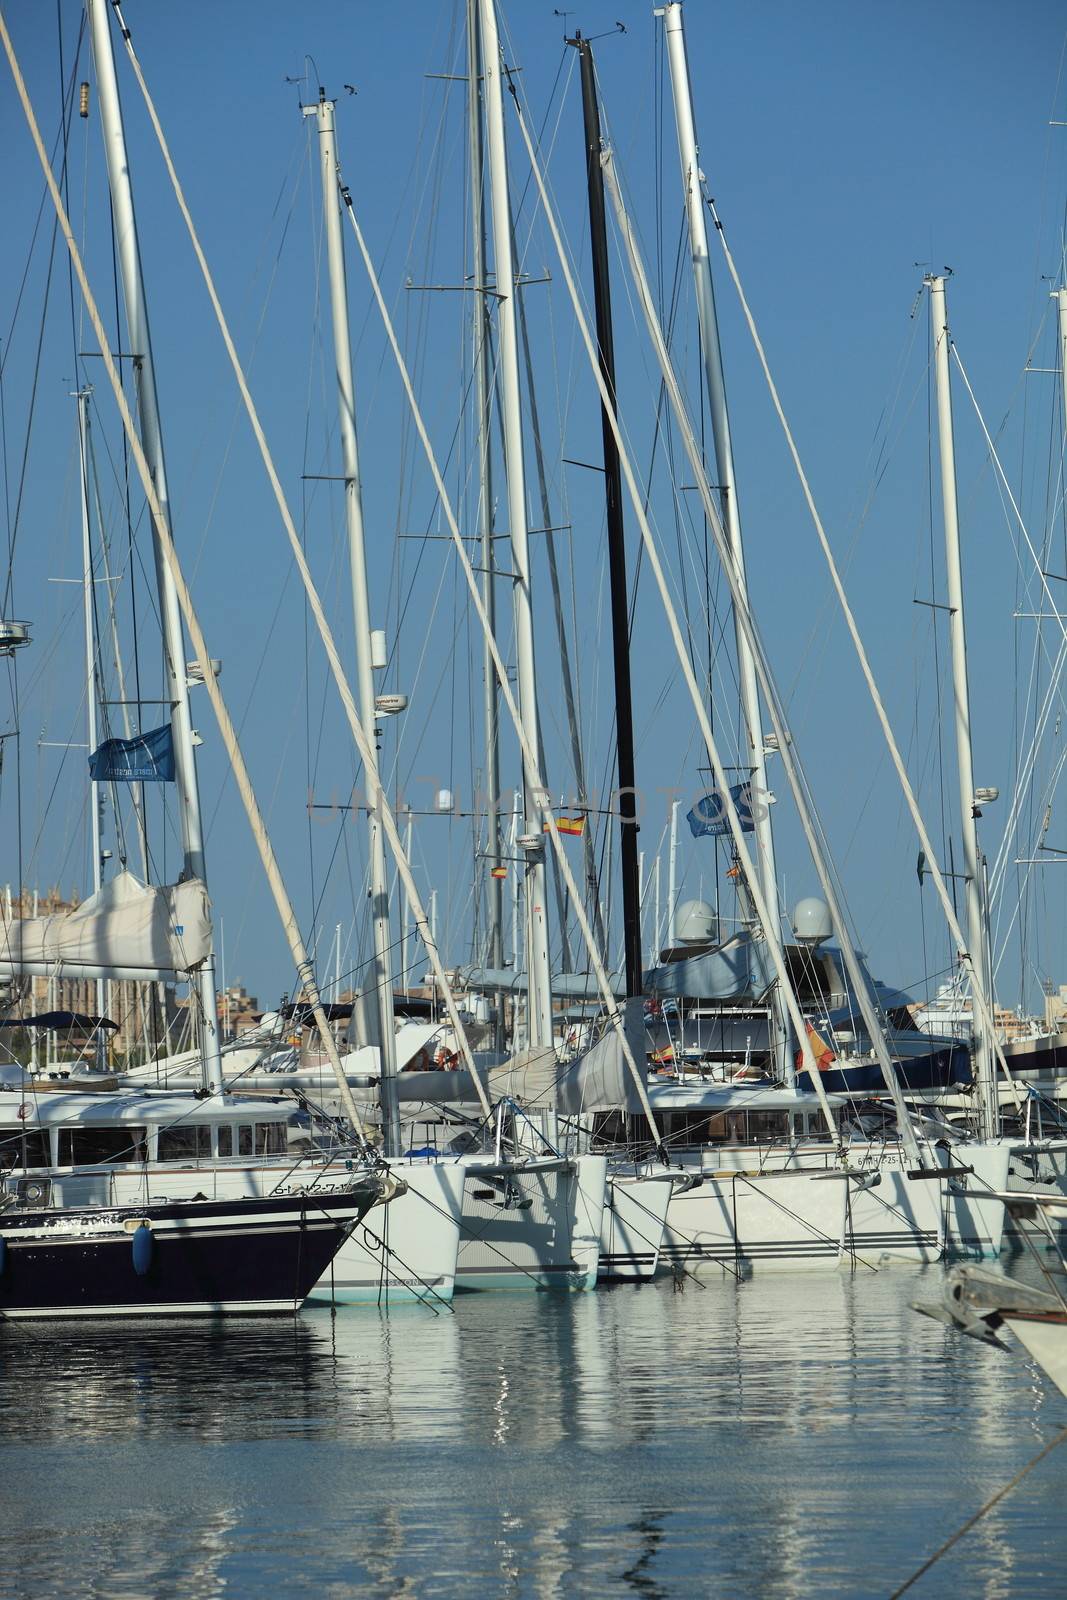 Tall metal masts and rigging of yachts moored in sheltered harbour catching the summer sun